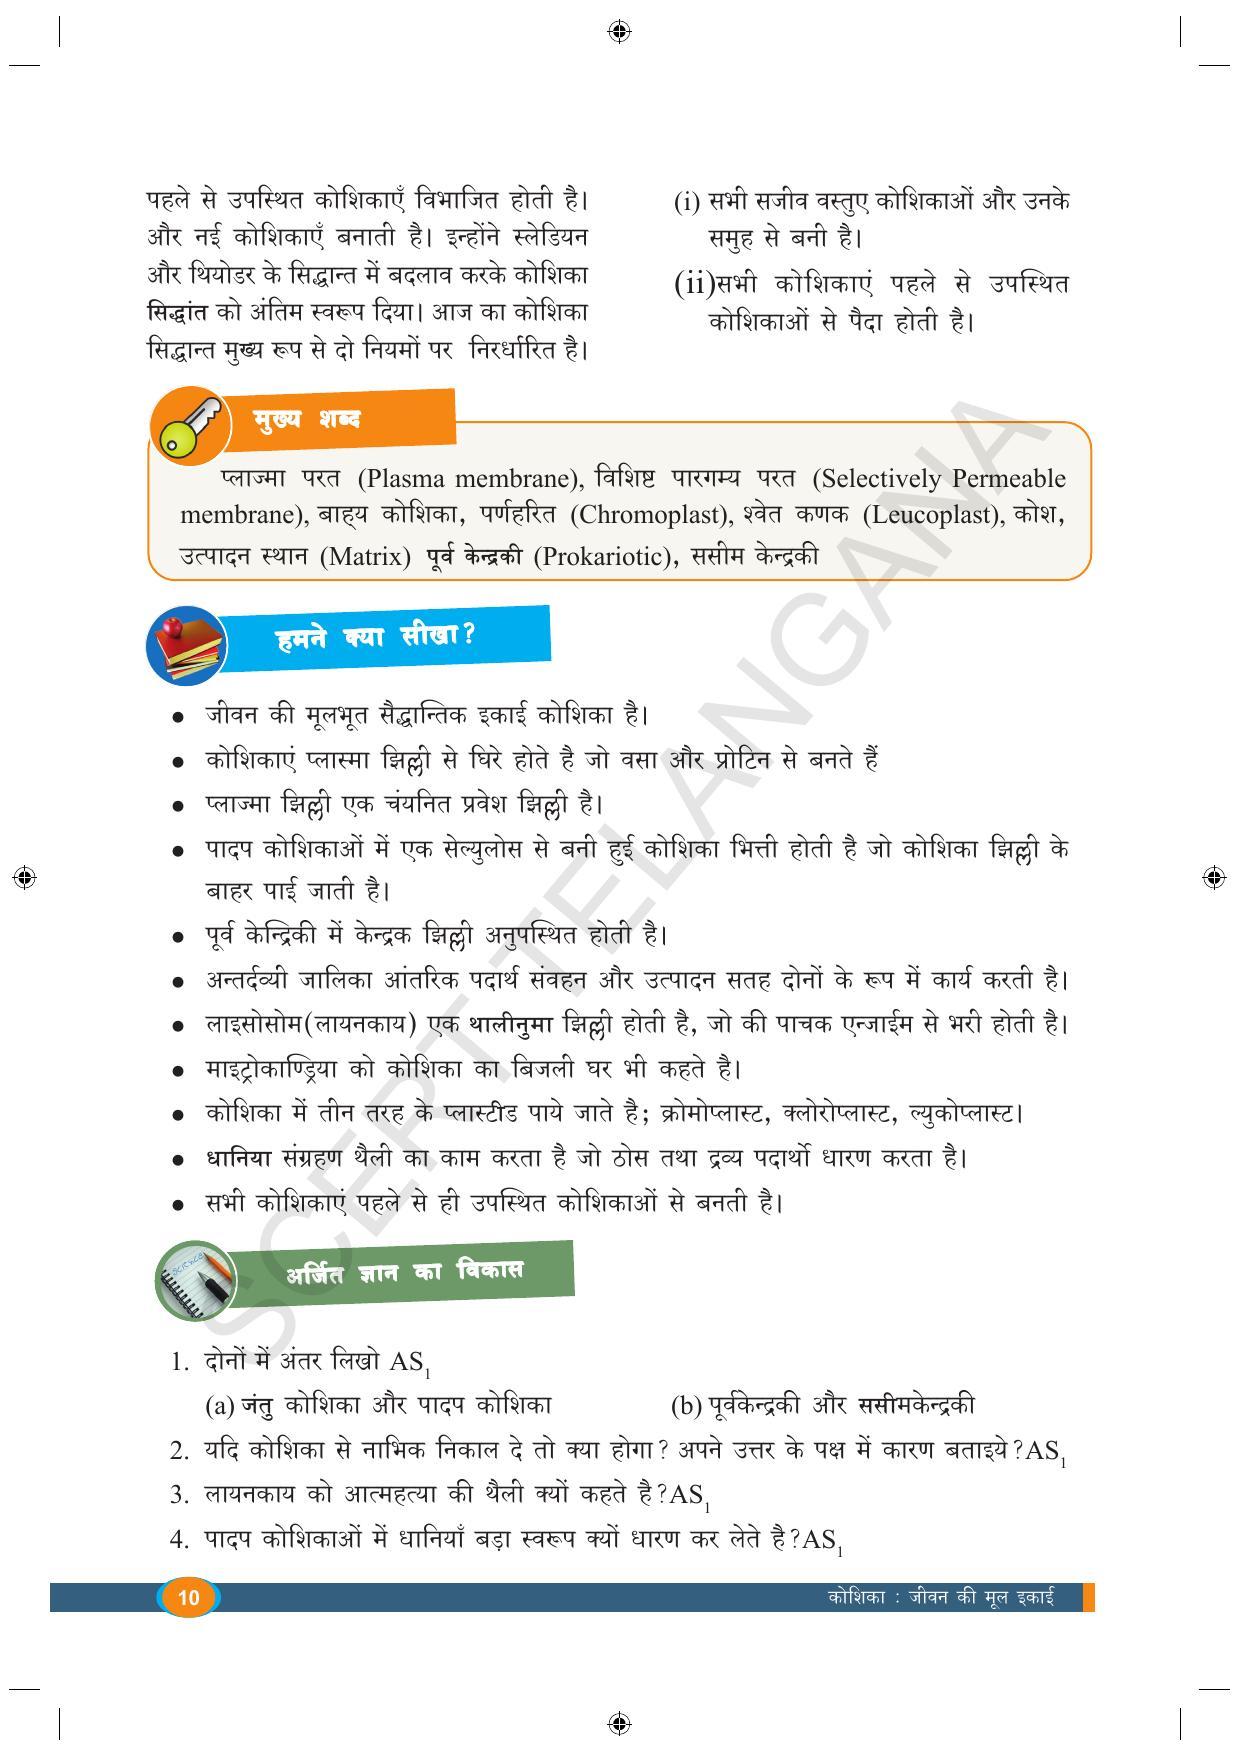 TS SCERT Class 9 Biological Science (Hindi Medium) Text Book - Page 22